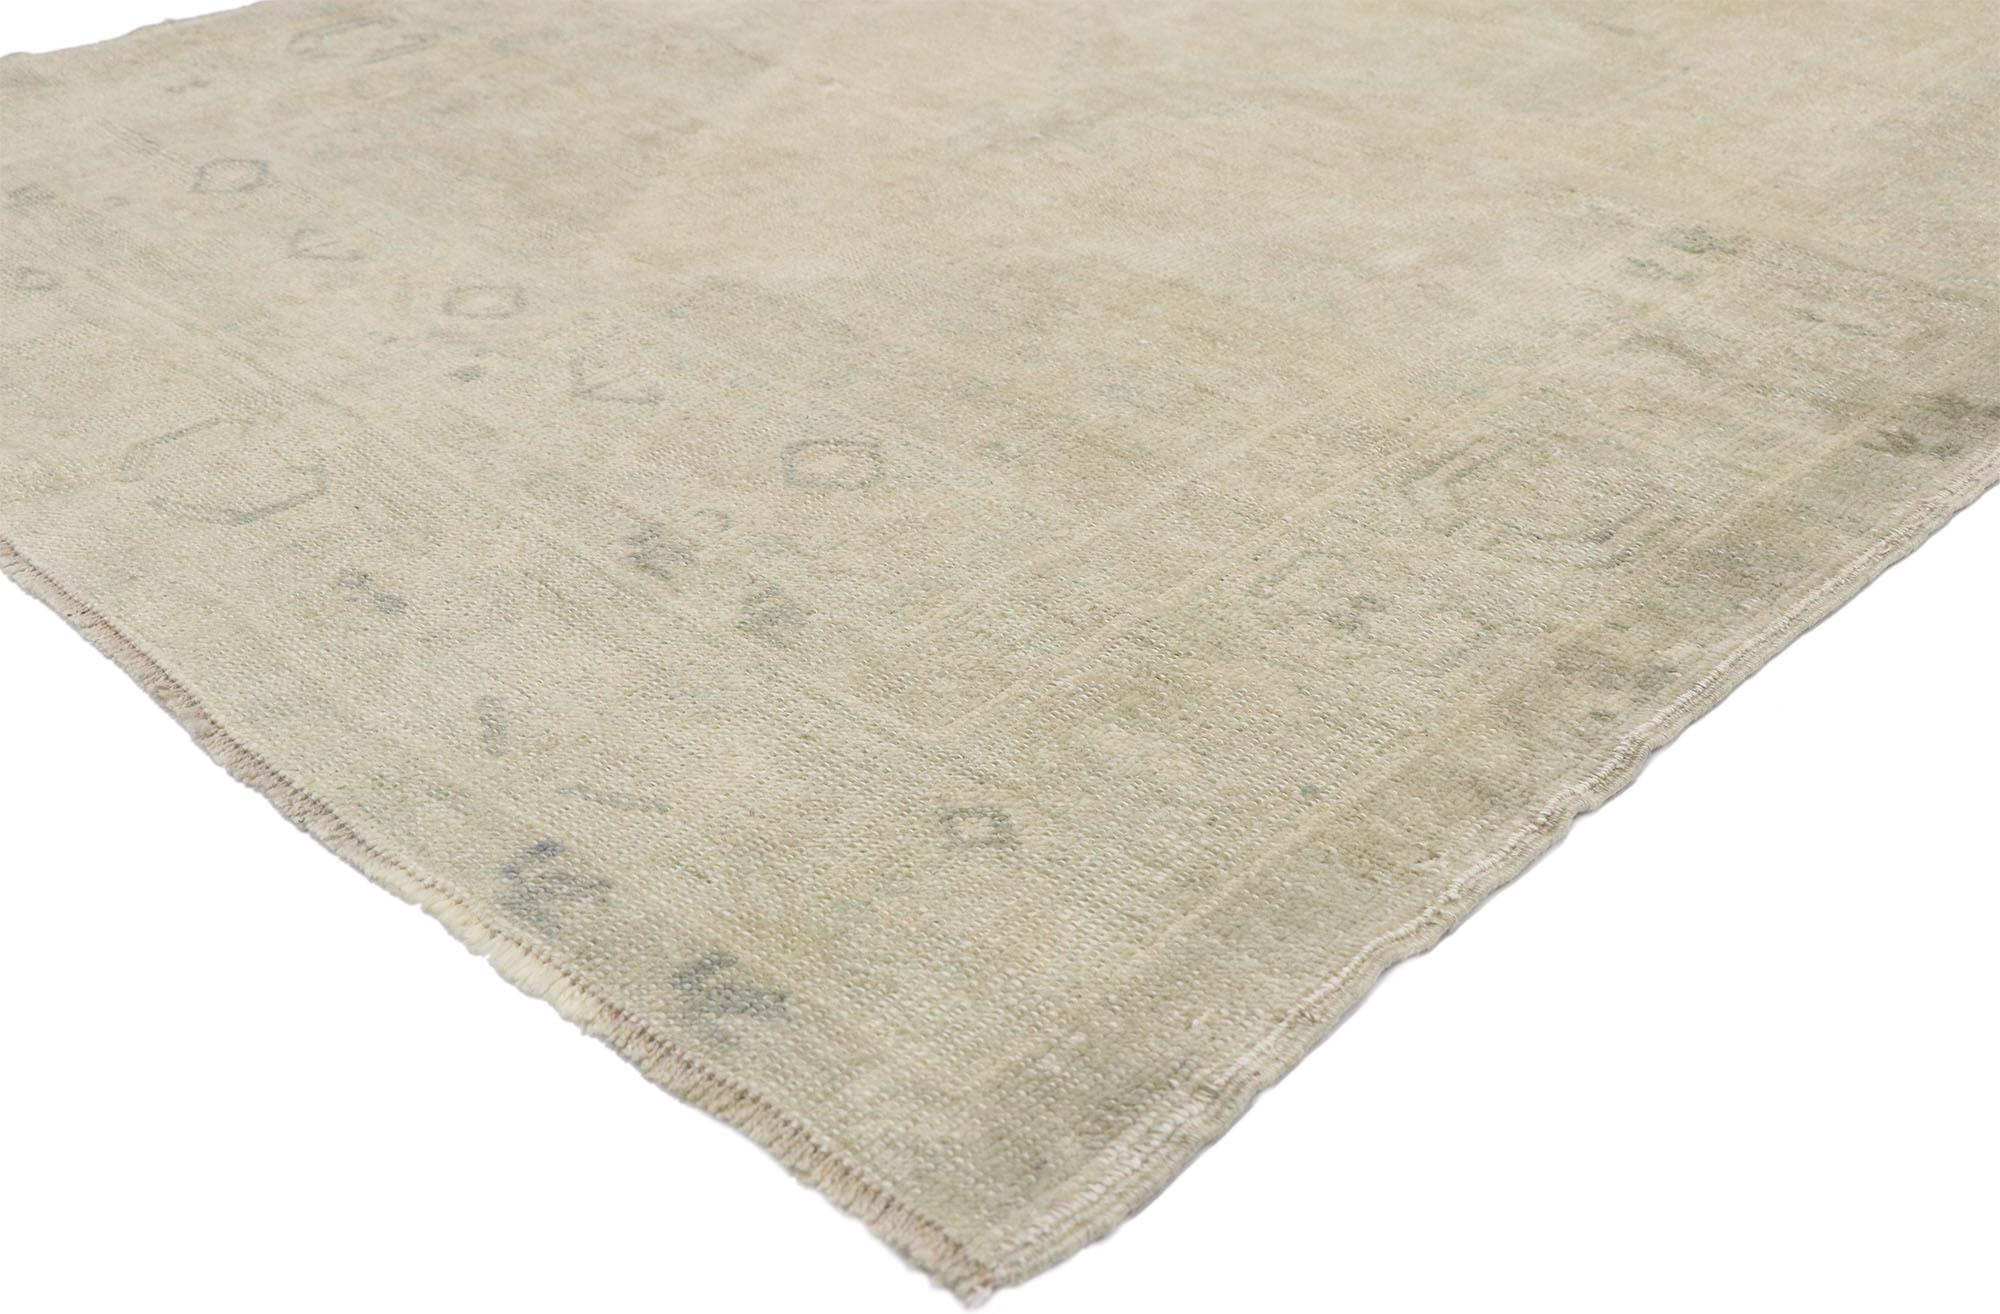 52676 Muted Vintage Turkish Oushak Rug, 03'10 x 07'10.
Calm cohesion meets easygoing elegance in this hand knotted wool vintage Turkish Oushak rug. The faded geometric pattern and muted colorway woven into this piece work together creating a